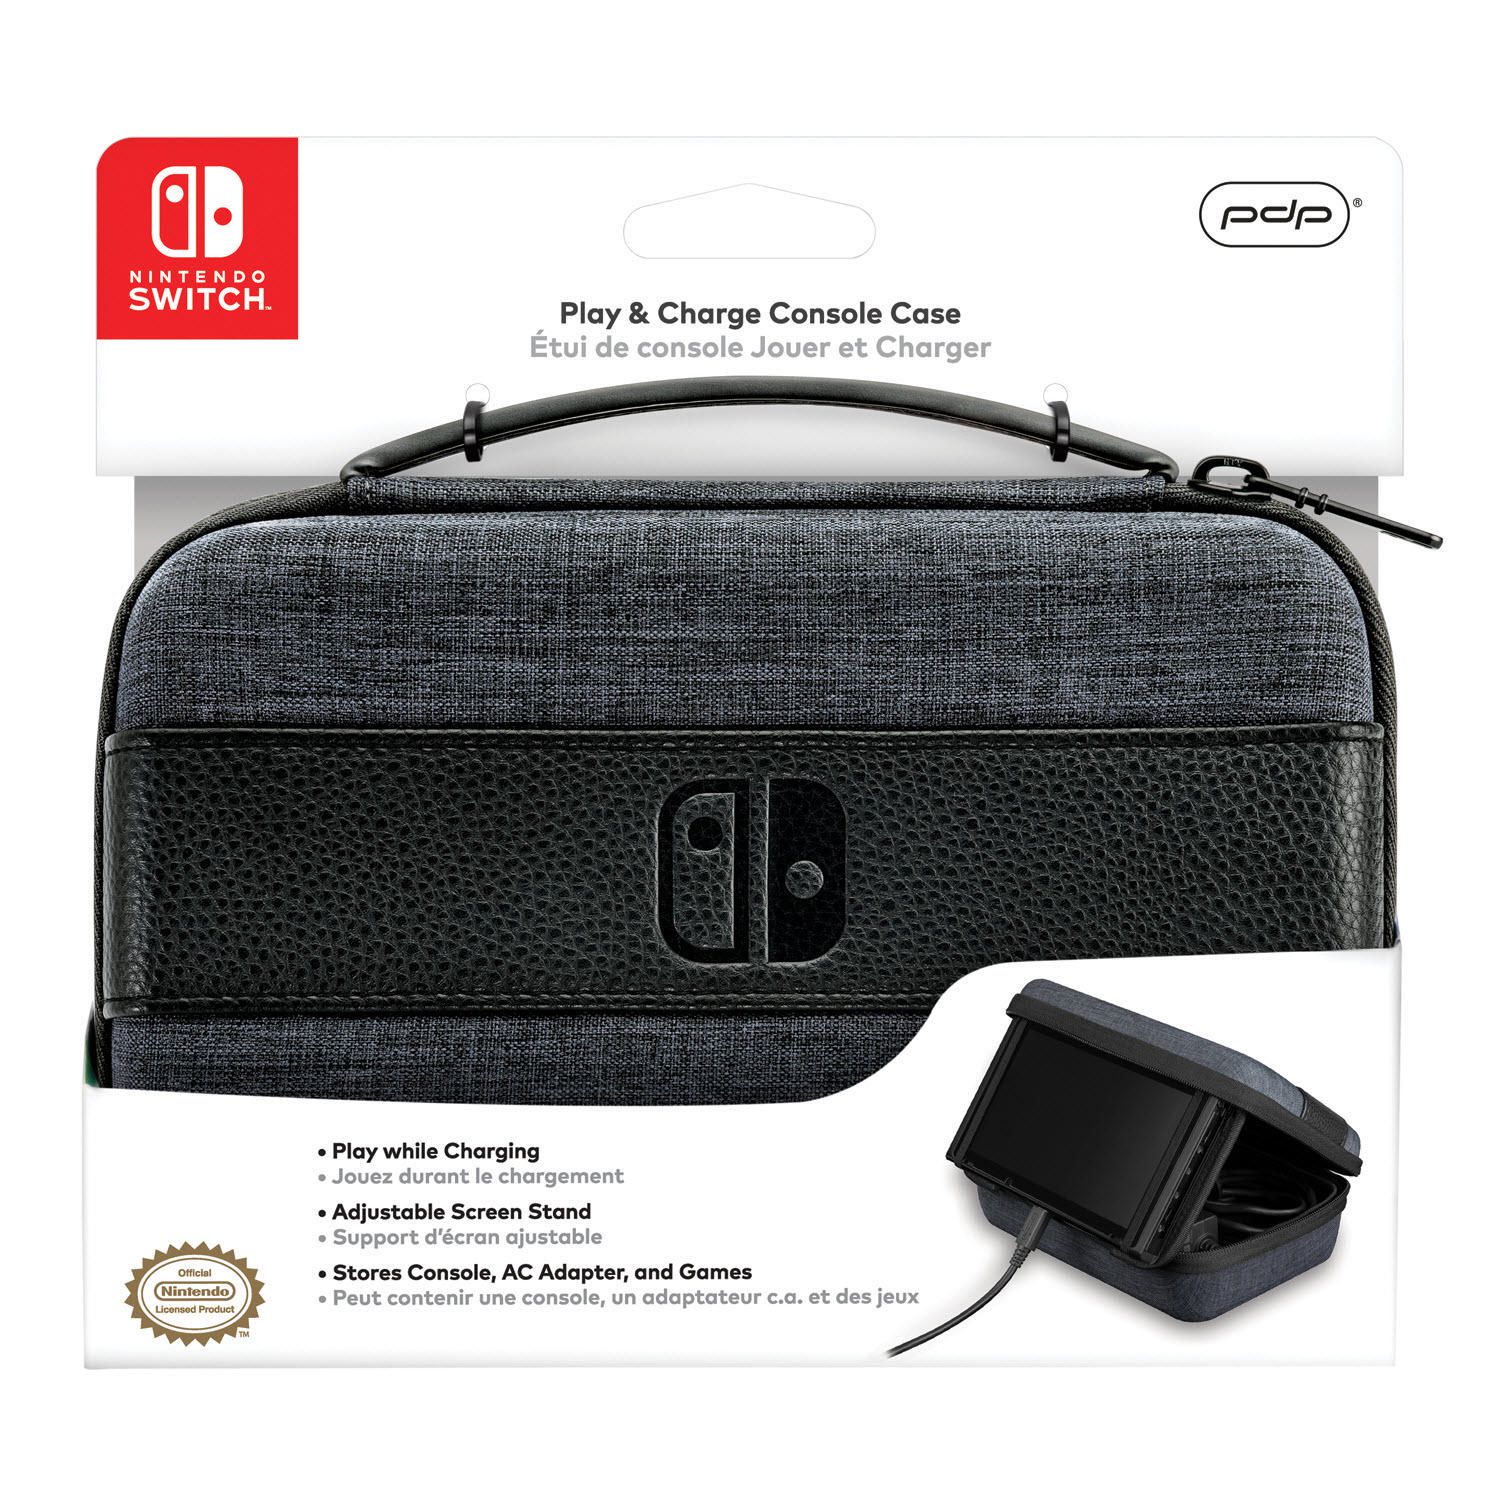 nintendo switch play & charge console case